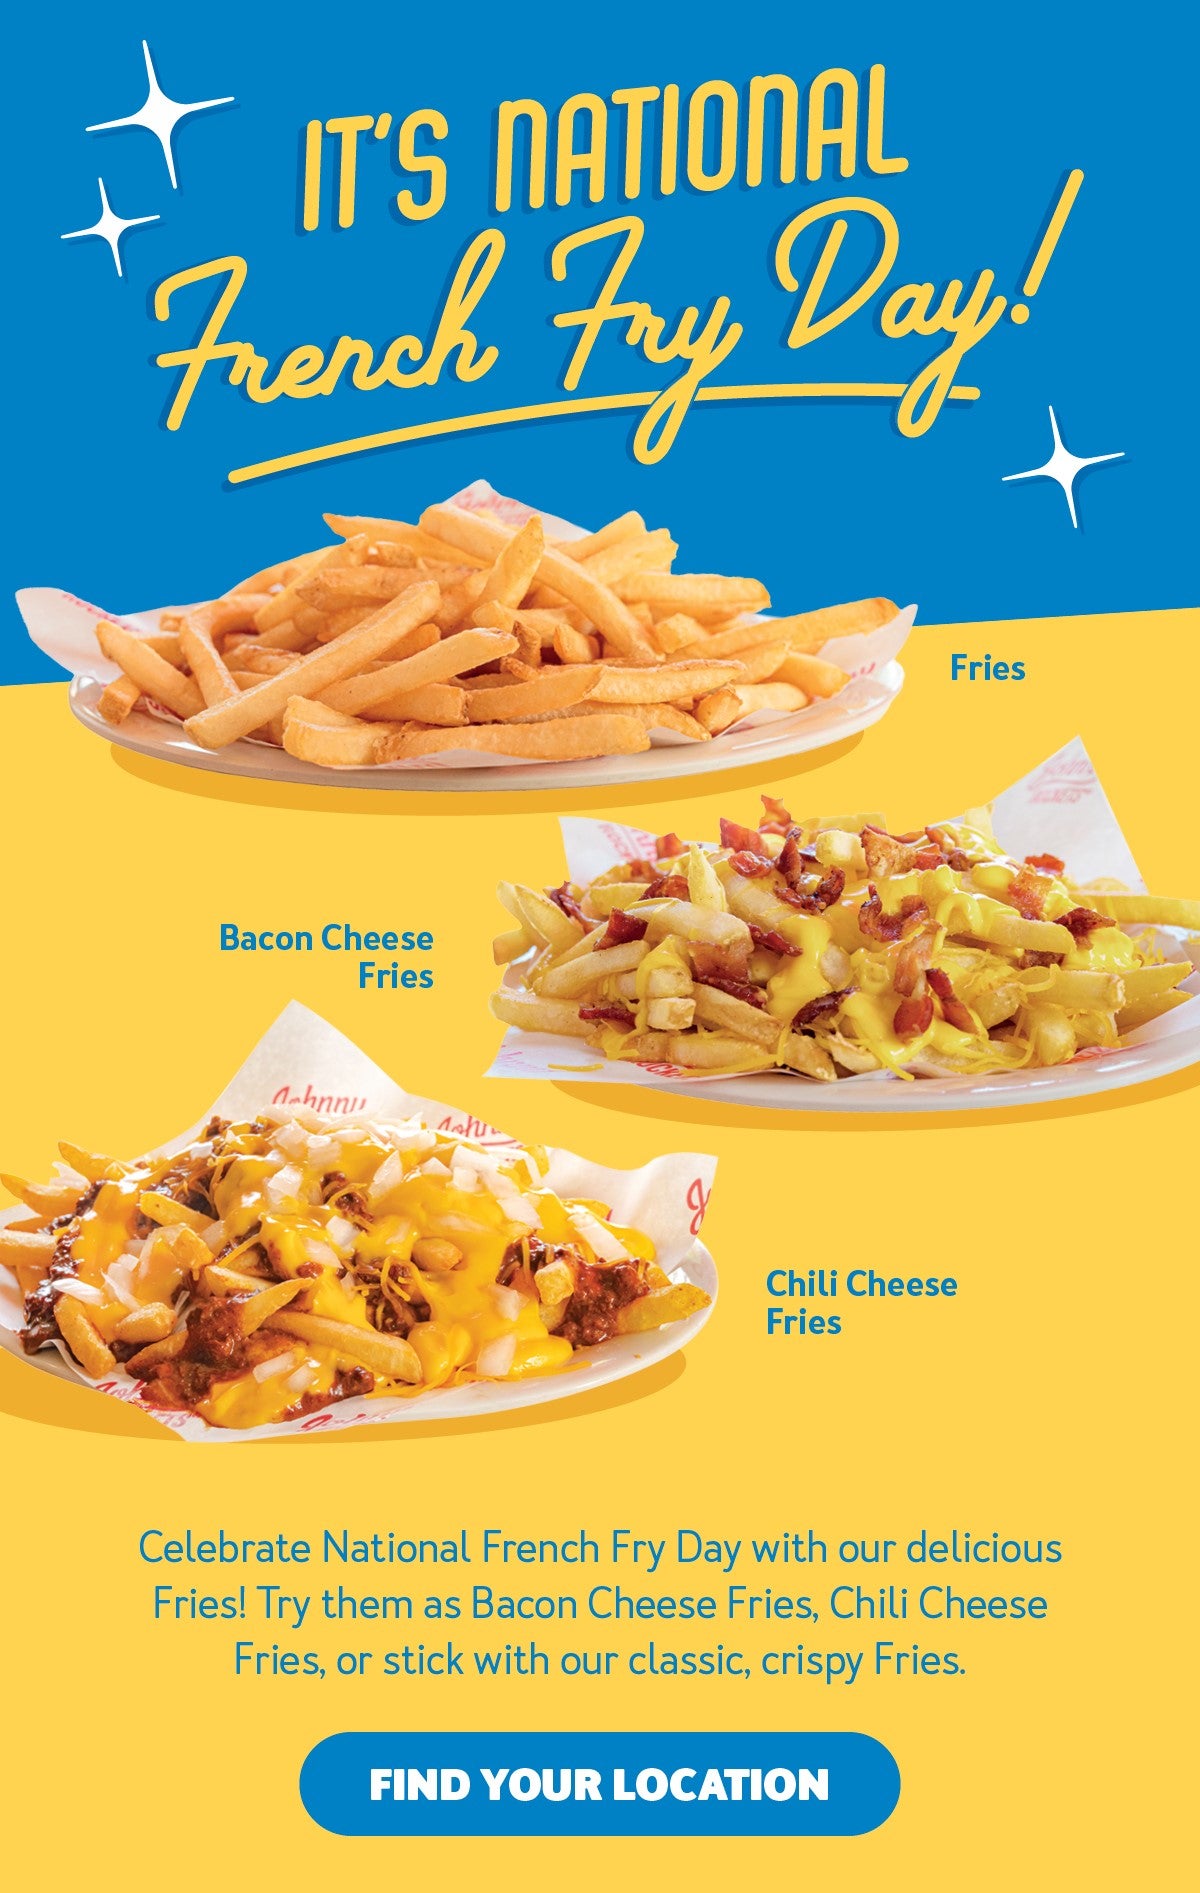 Celebrate National French Fry Day with Us!